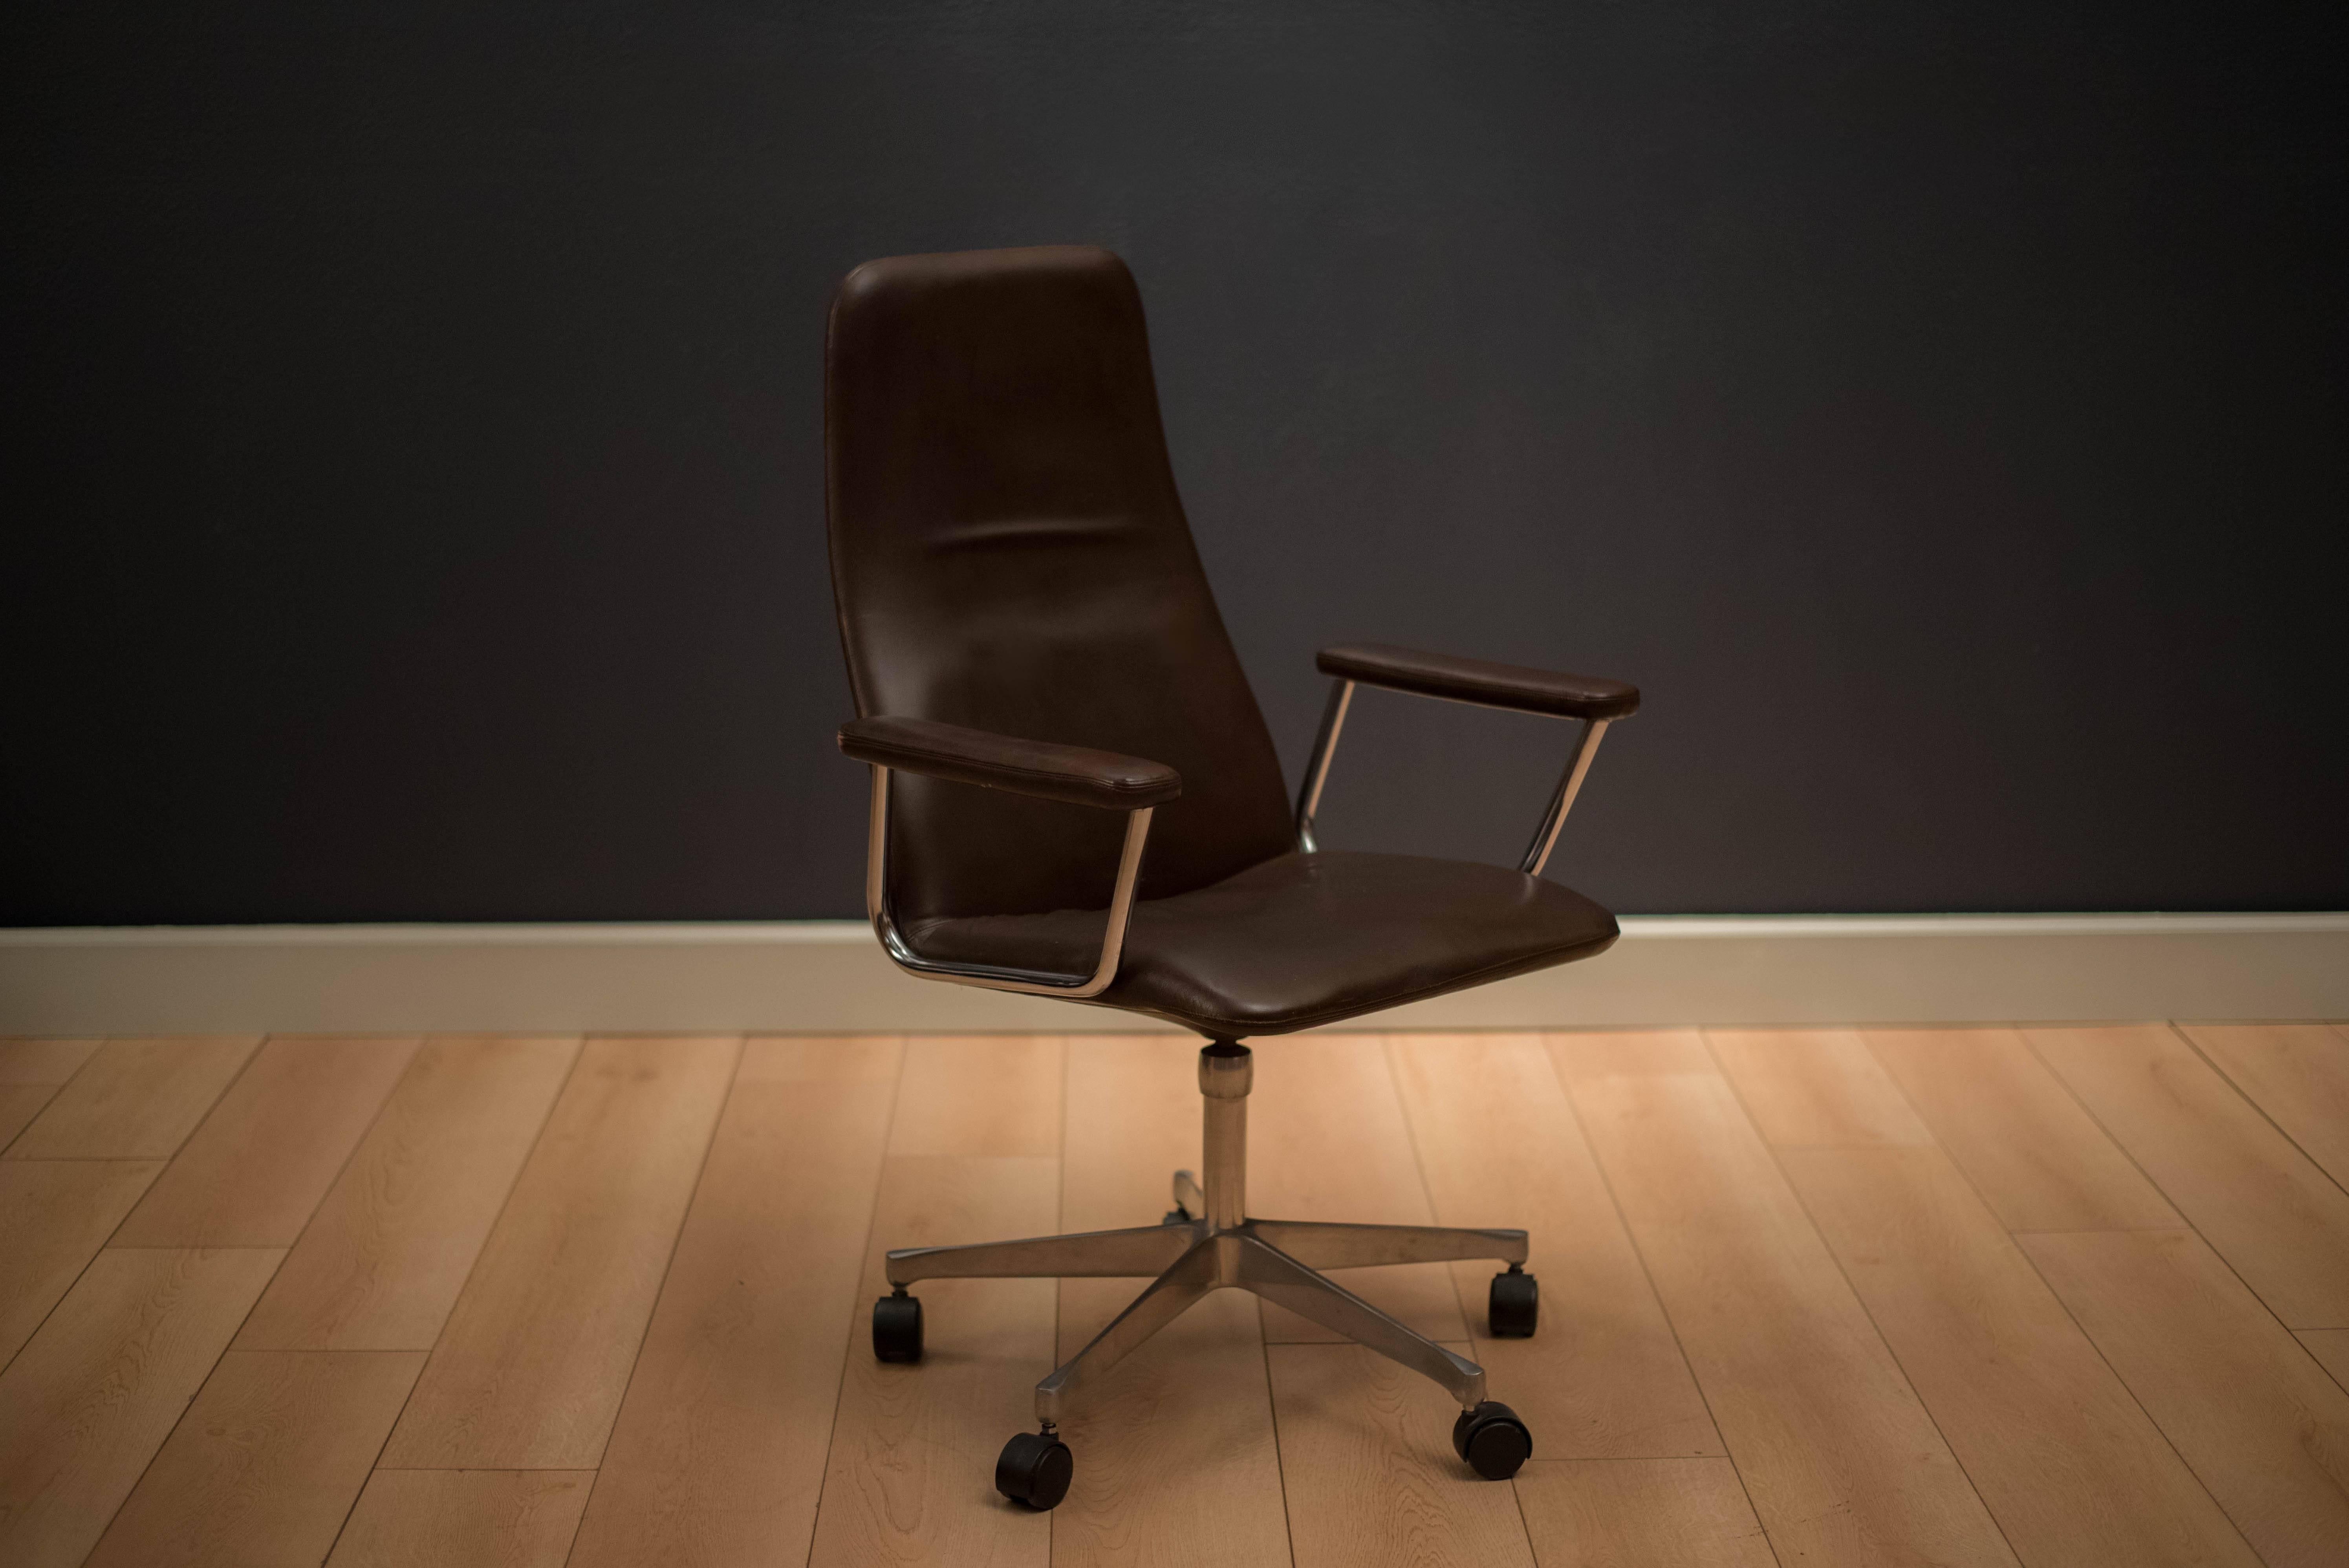 Vintage swivel office chair by Kevi A/S, circa 1960s. This piece features the original brown leather upholstery and aluminum base.